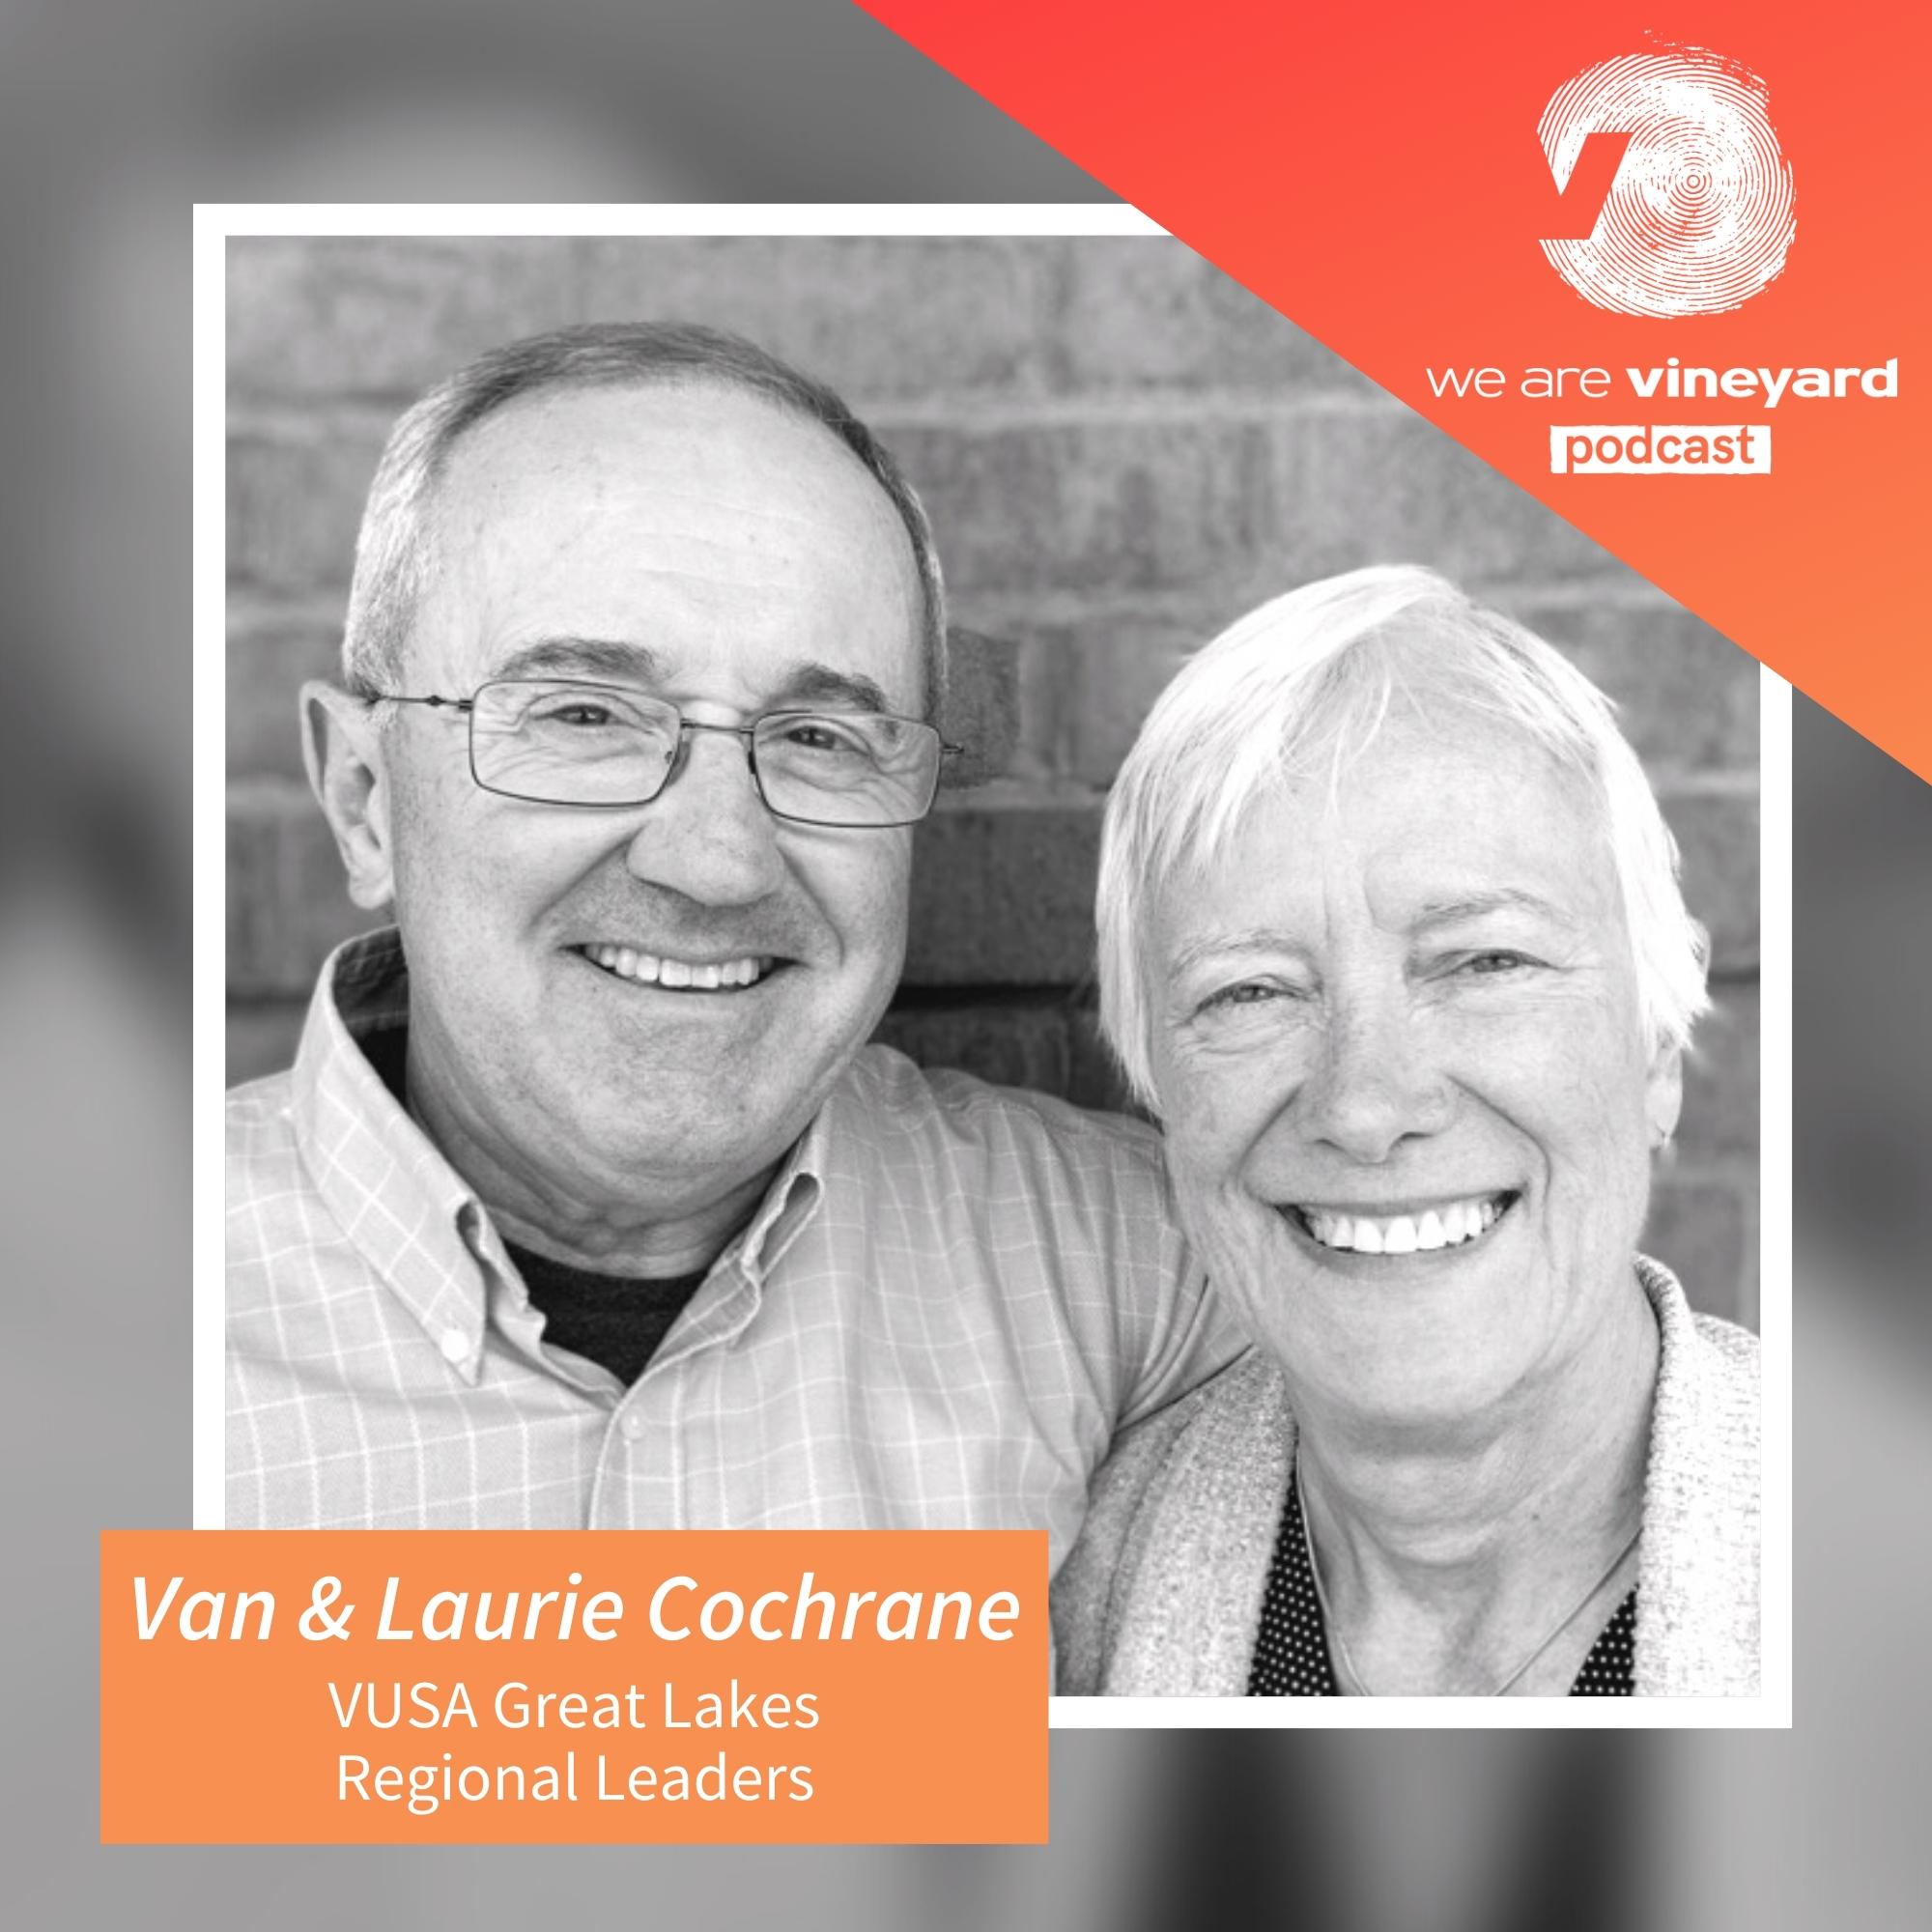 Van &#038; Laurie Cochrane: Our Journey Into The Vineyard